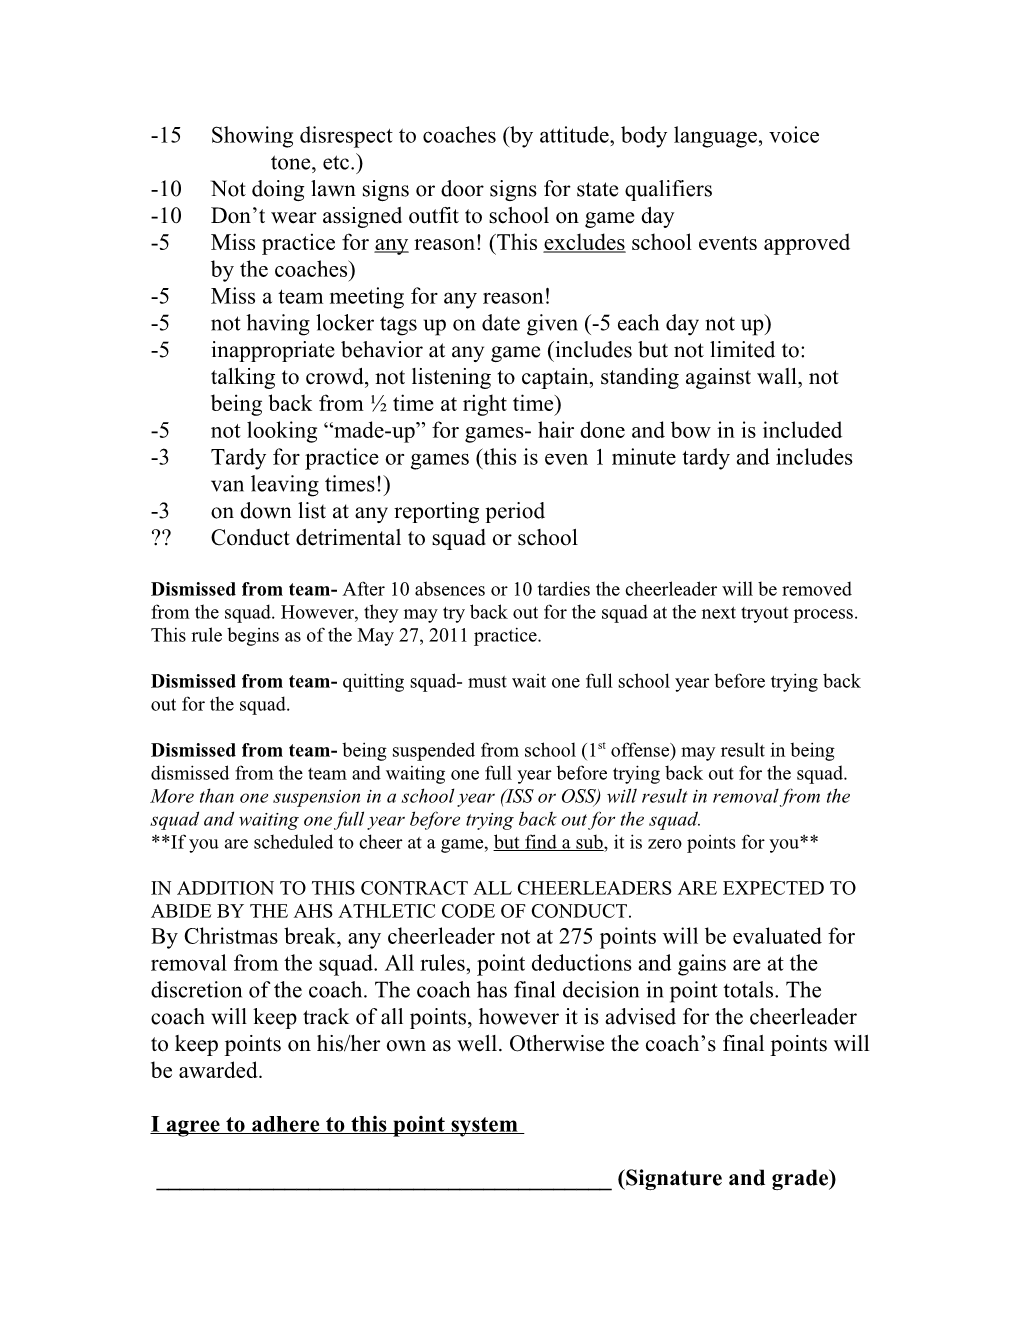 Spirit Squad Contract- Point System